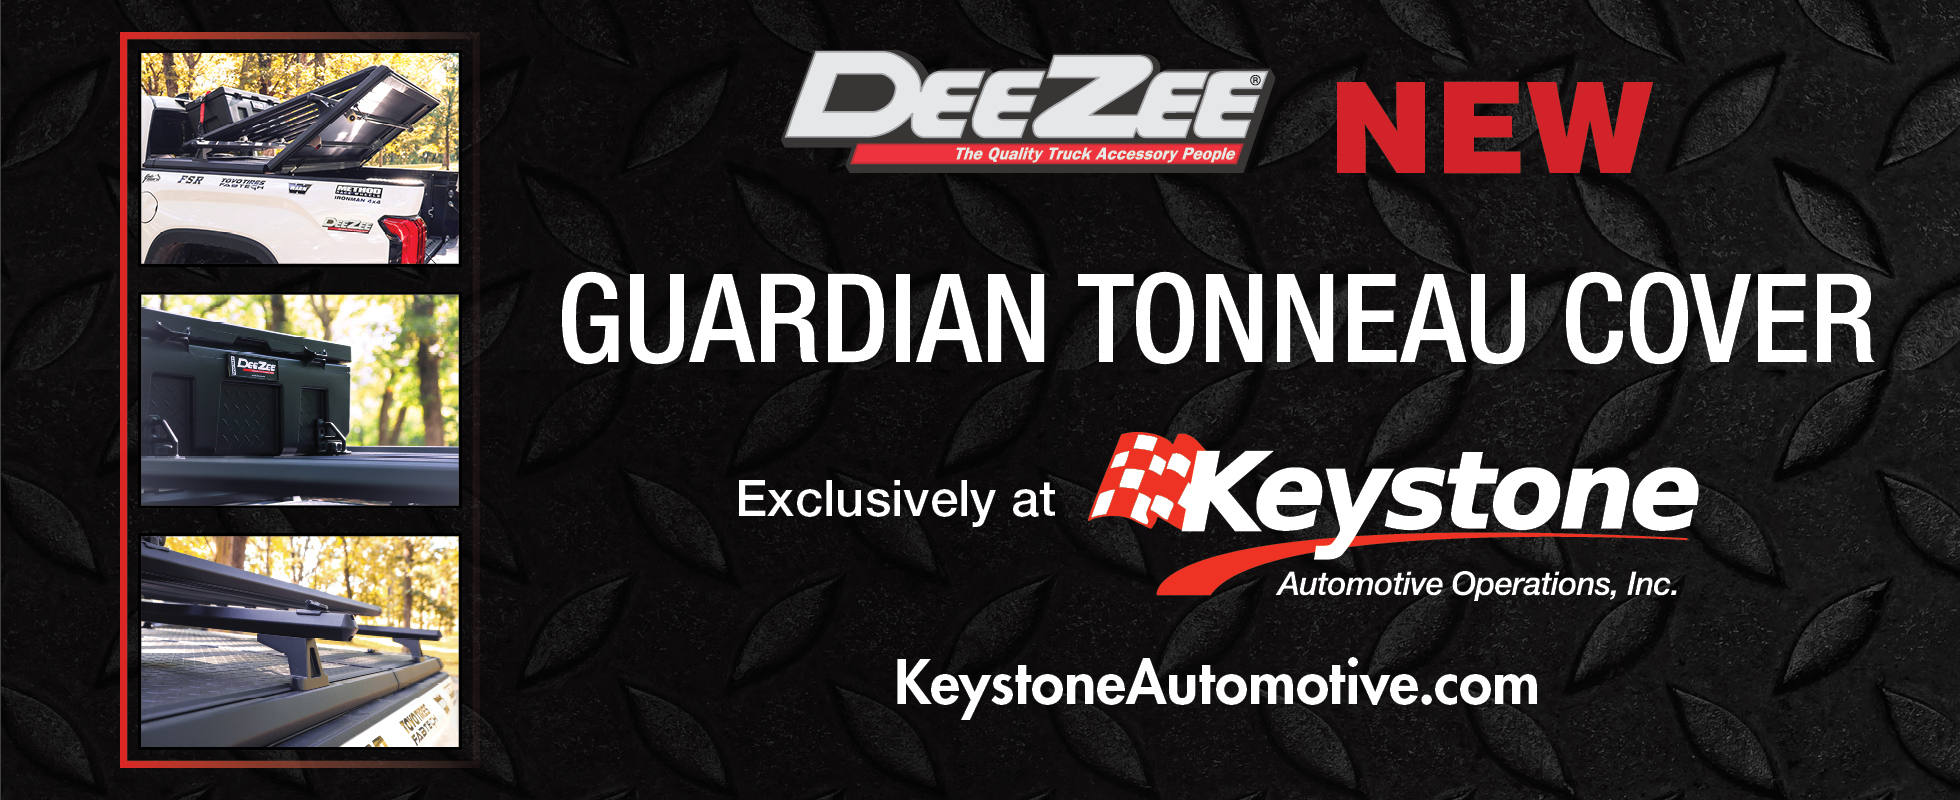 Featured Product: Dee Zee Guardian Tonneau Cover | THE SHOP